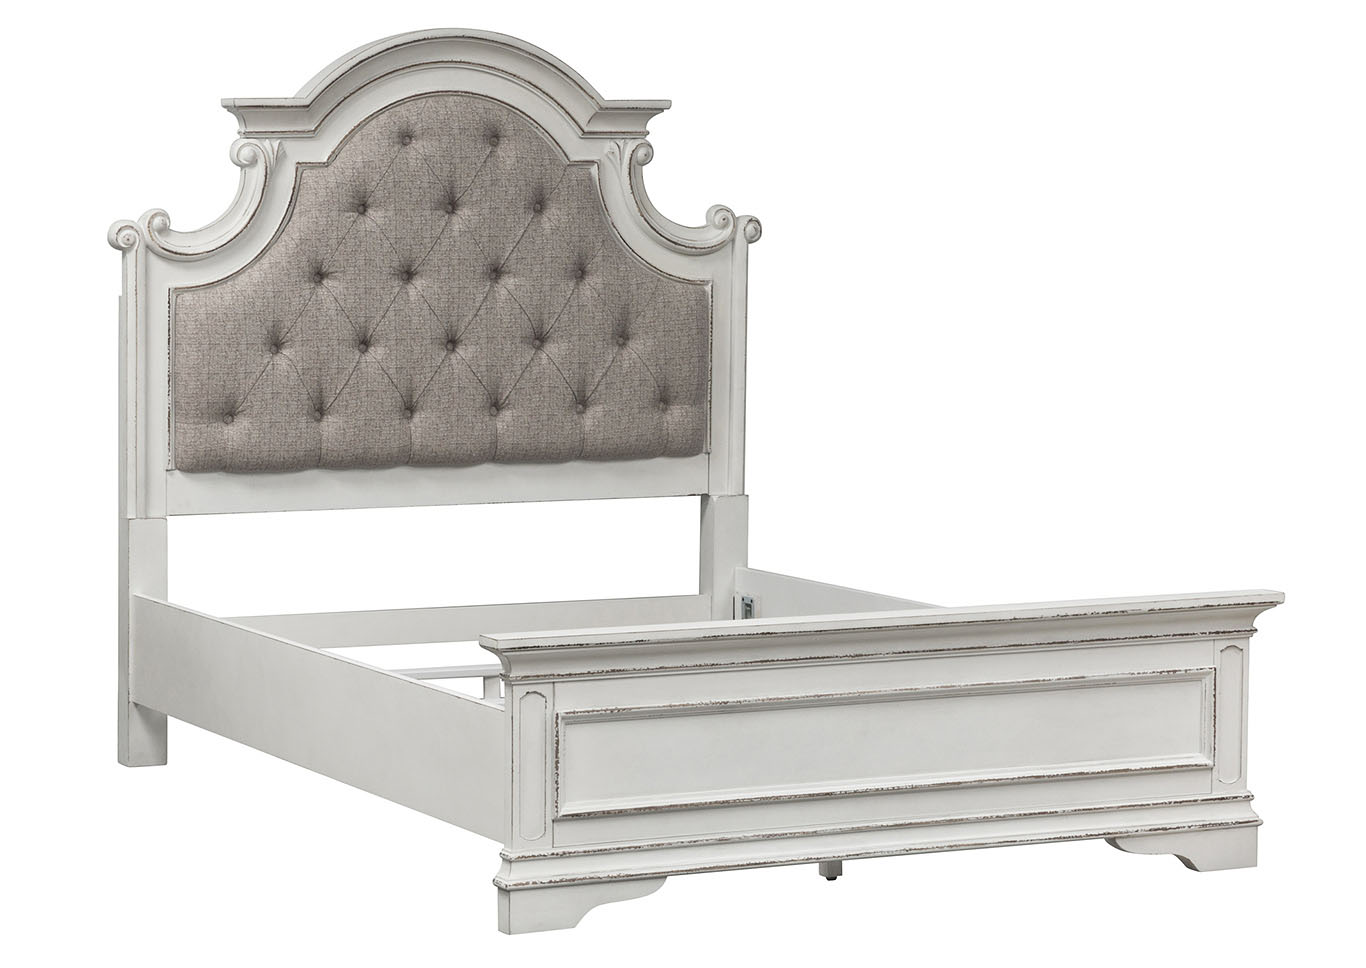 Magnolia Manor Antique White King Upholstered Panel Bed,Liberty